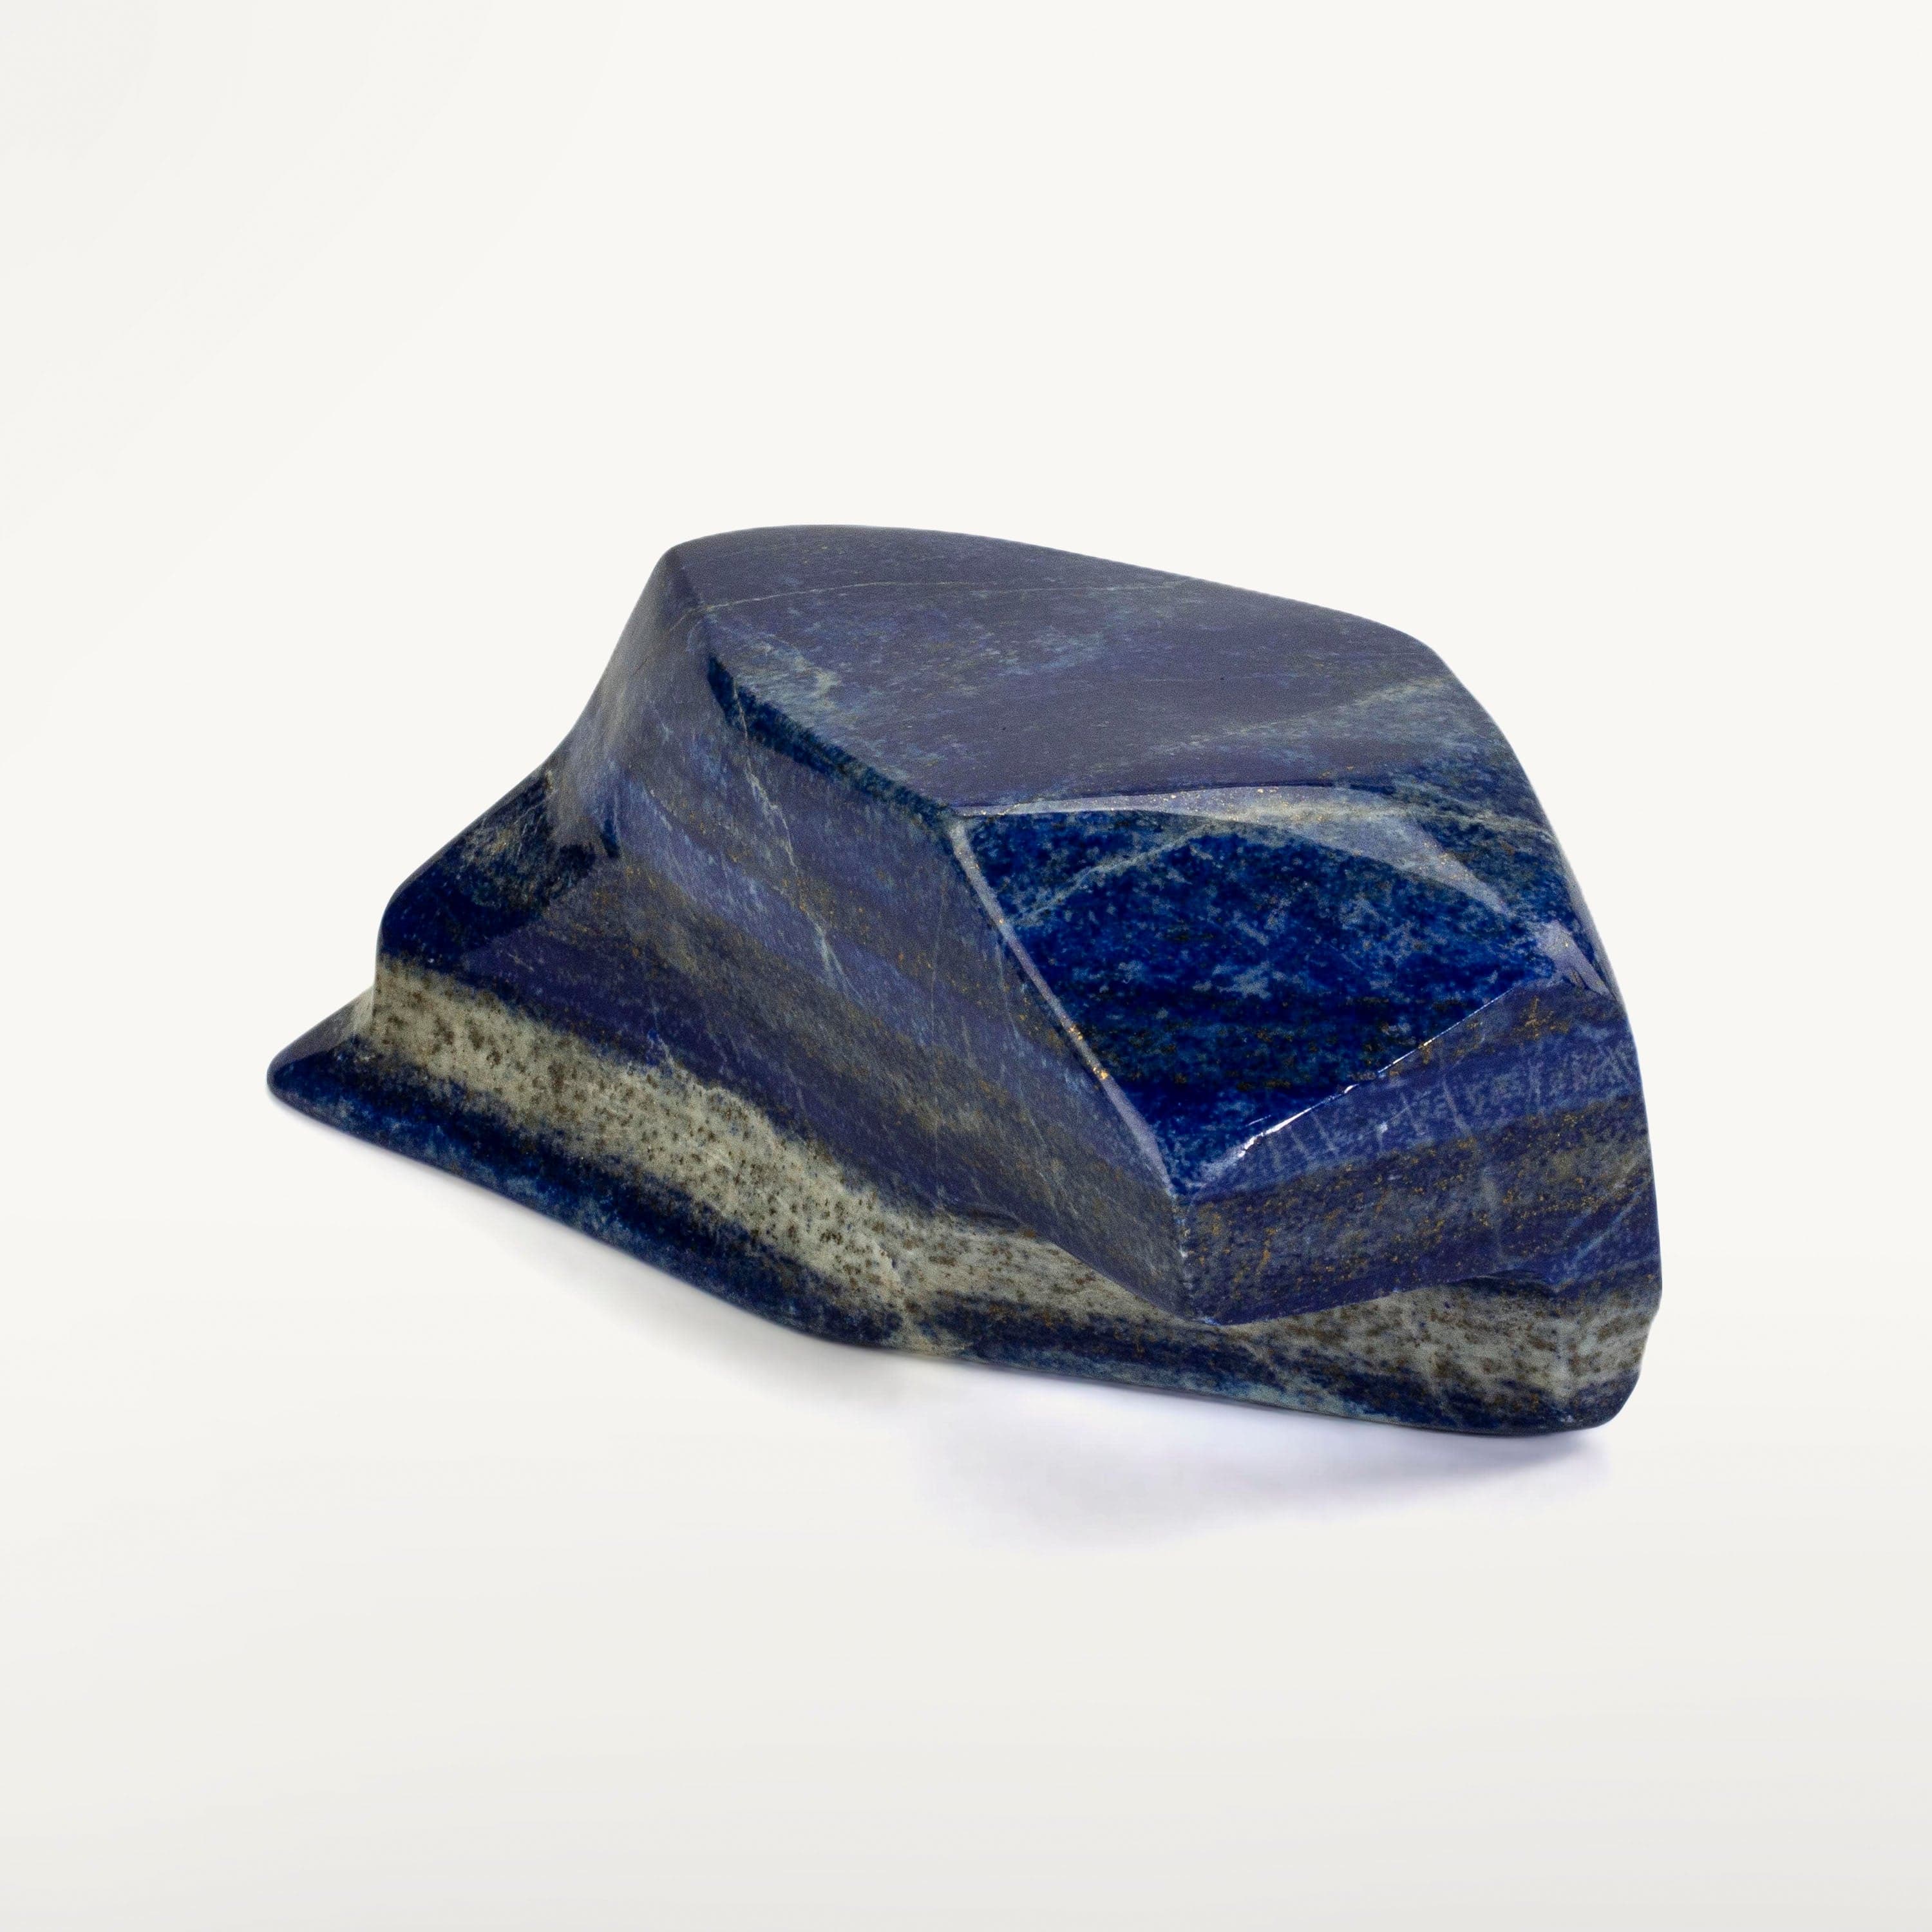 Kalifano Lapis Lapis Lazuil Freeform from Afghanistan - 1.3 kg / 2.8 lbs LP1400.004